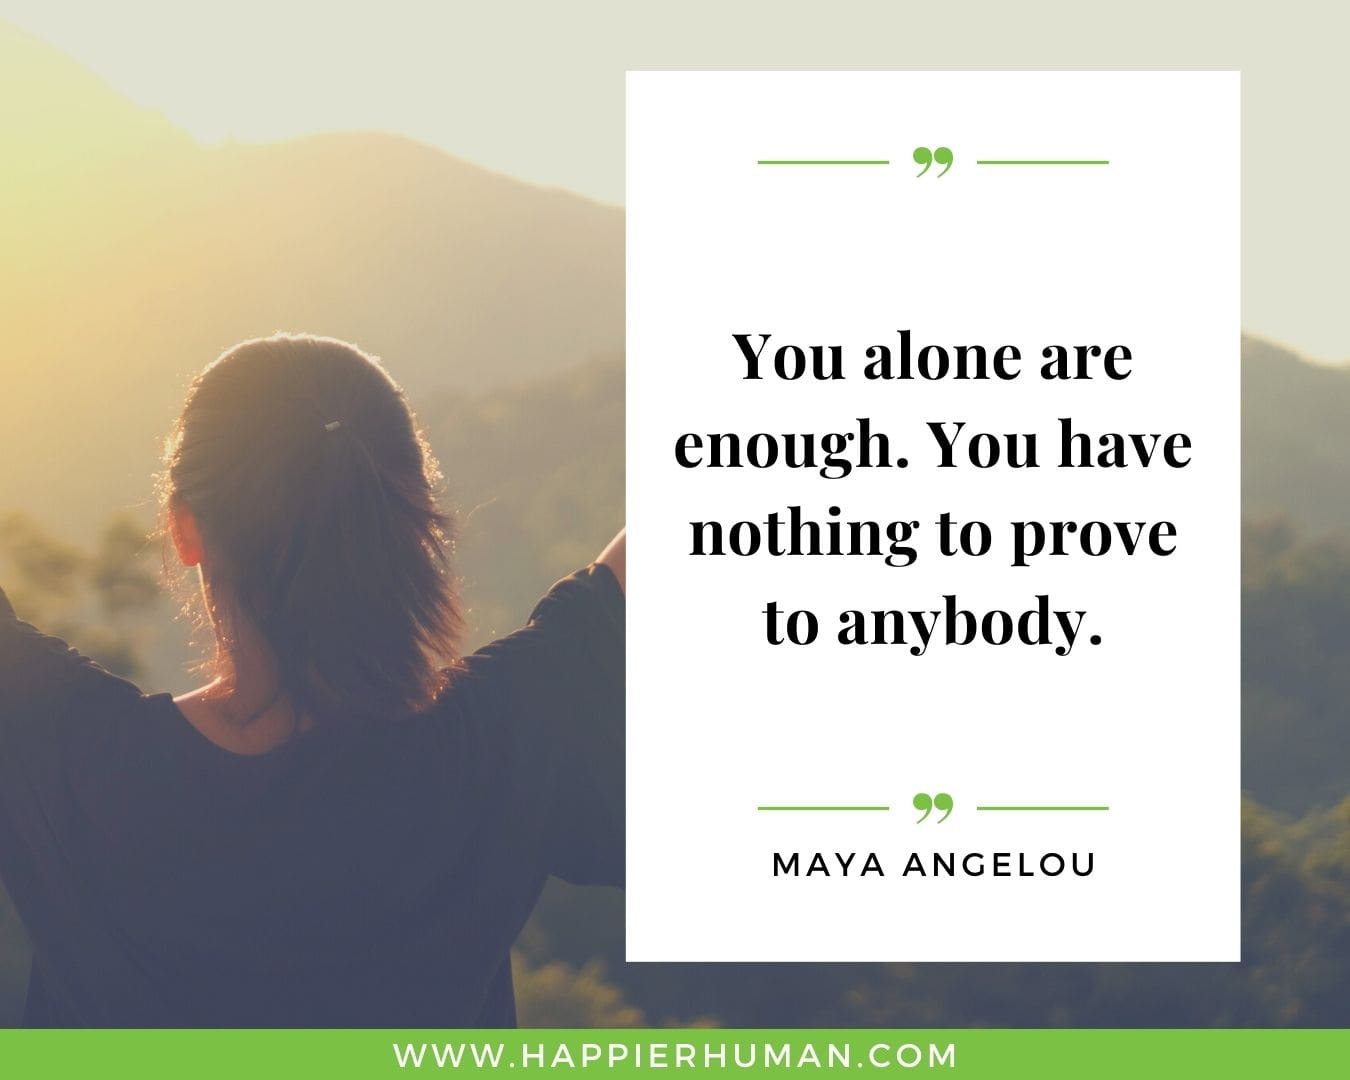 Positive Energy Quotes - “You alone are enough. You have nothing to prove to anybody.” - Maya Angelou